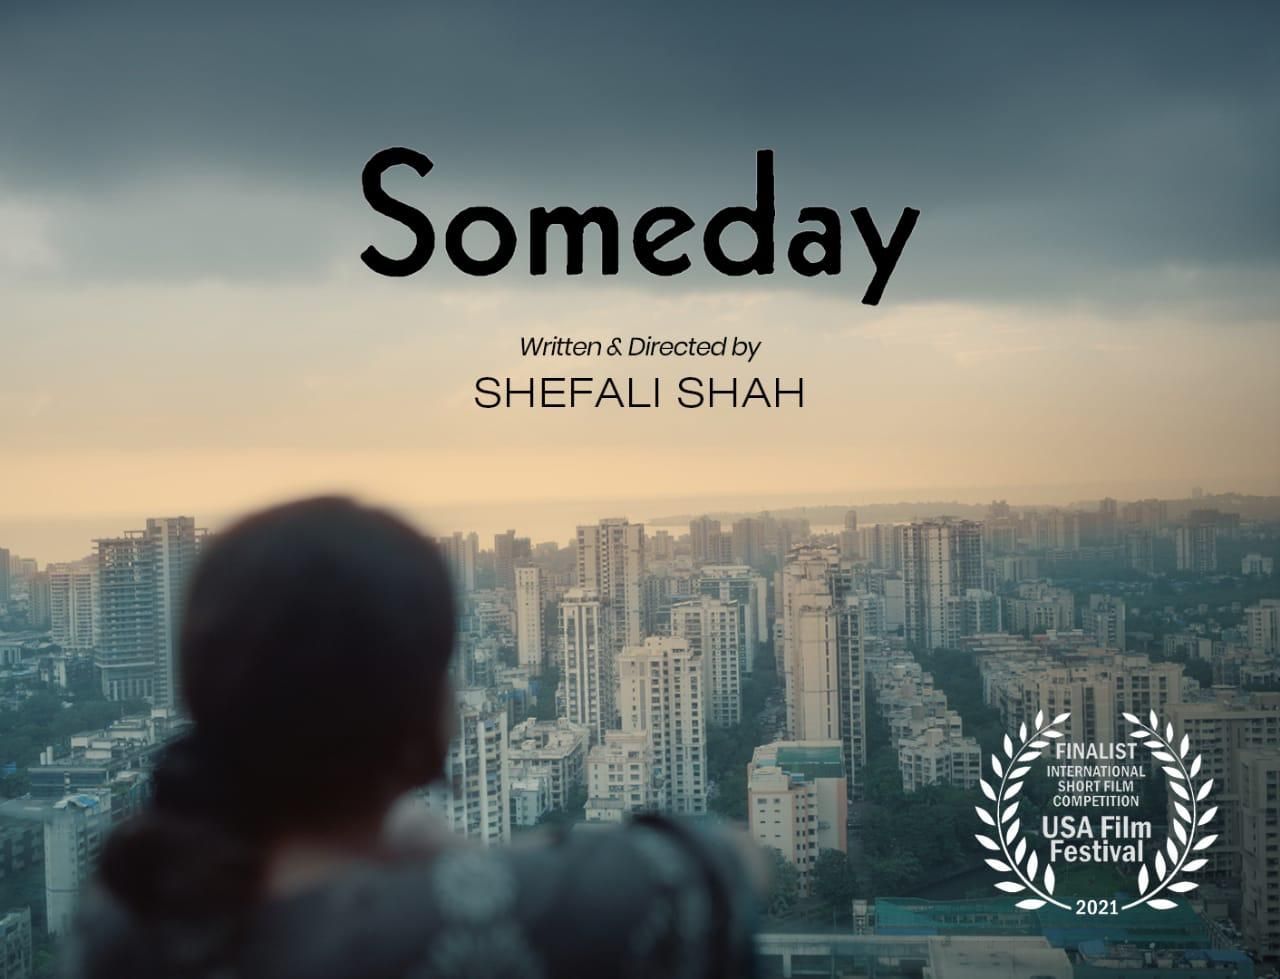 Shefali Shah’s Maiden Directorial Venture Someday Selected For 51st Annual USA Film Festival